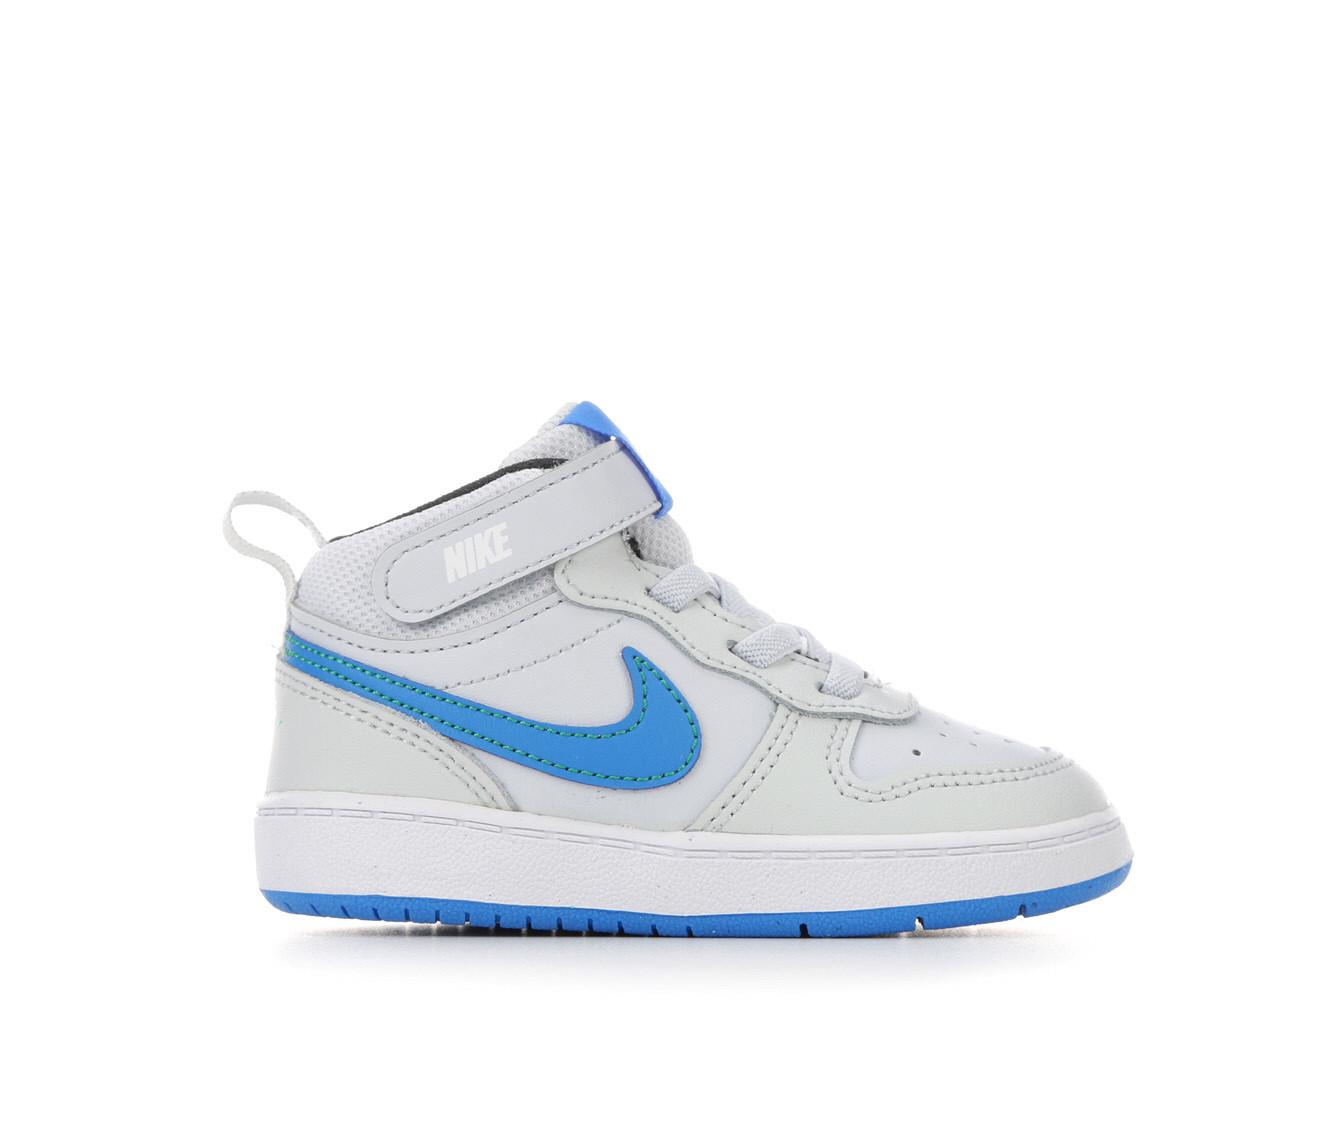 Boys' Nike Infant & Toddler Court Borough Mid 2 Sneakers | Shoe Carnival